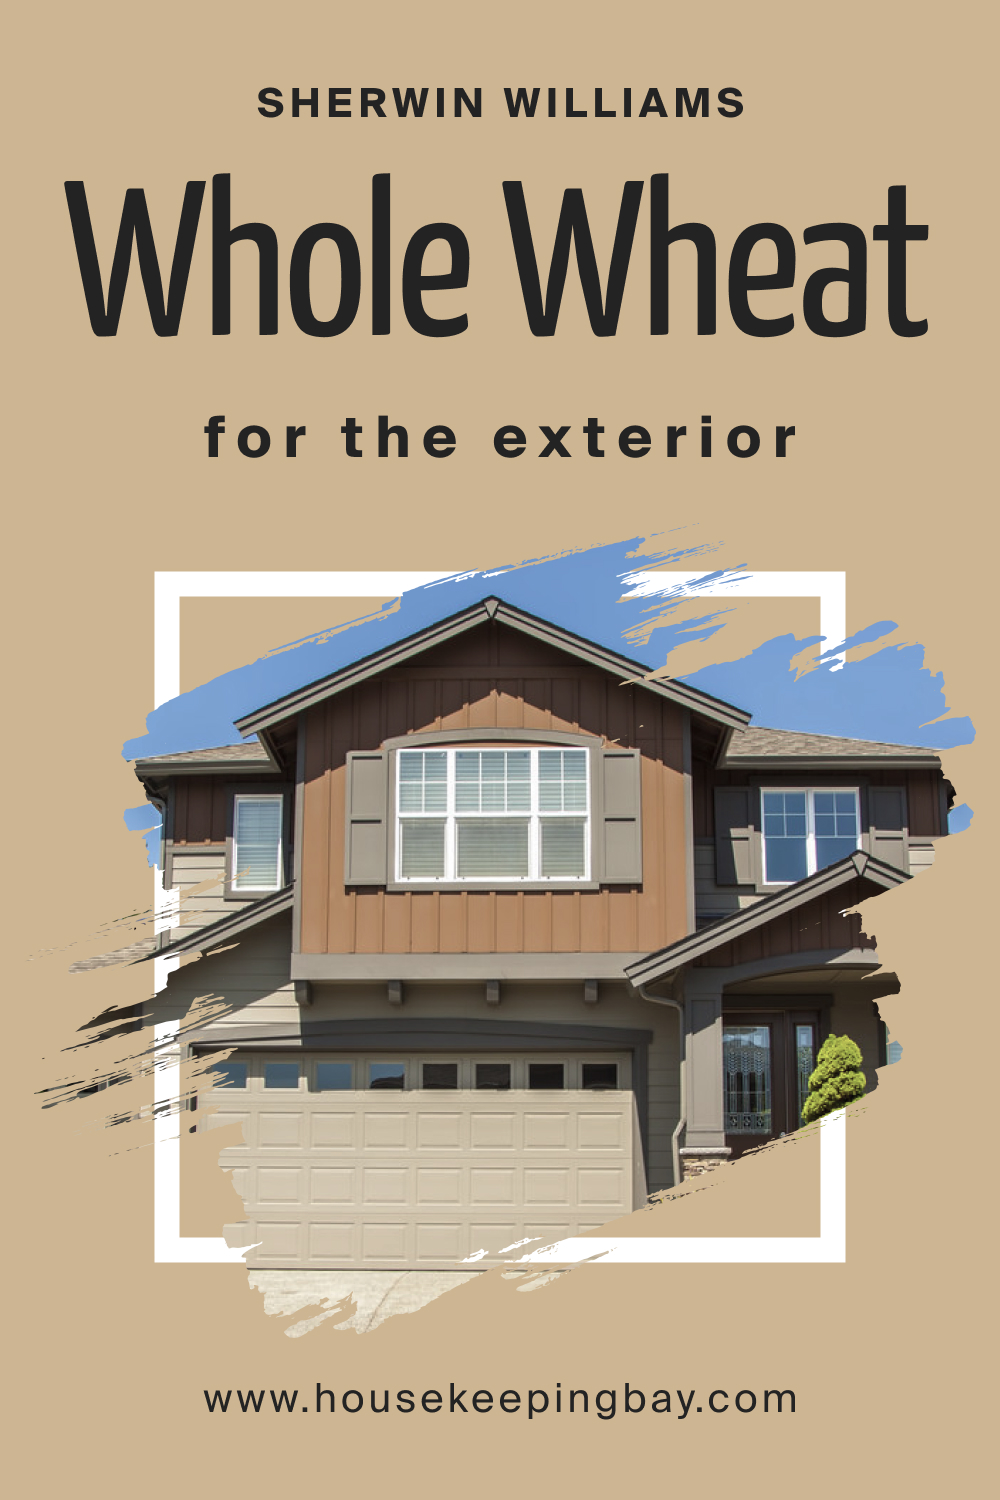 Sherwin Williams. SW Whole Wheat For the exterior